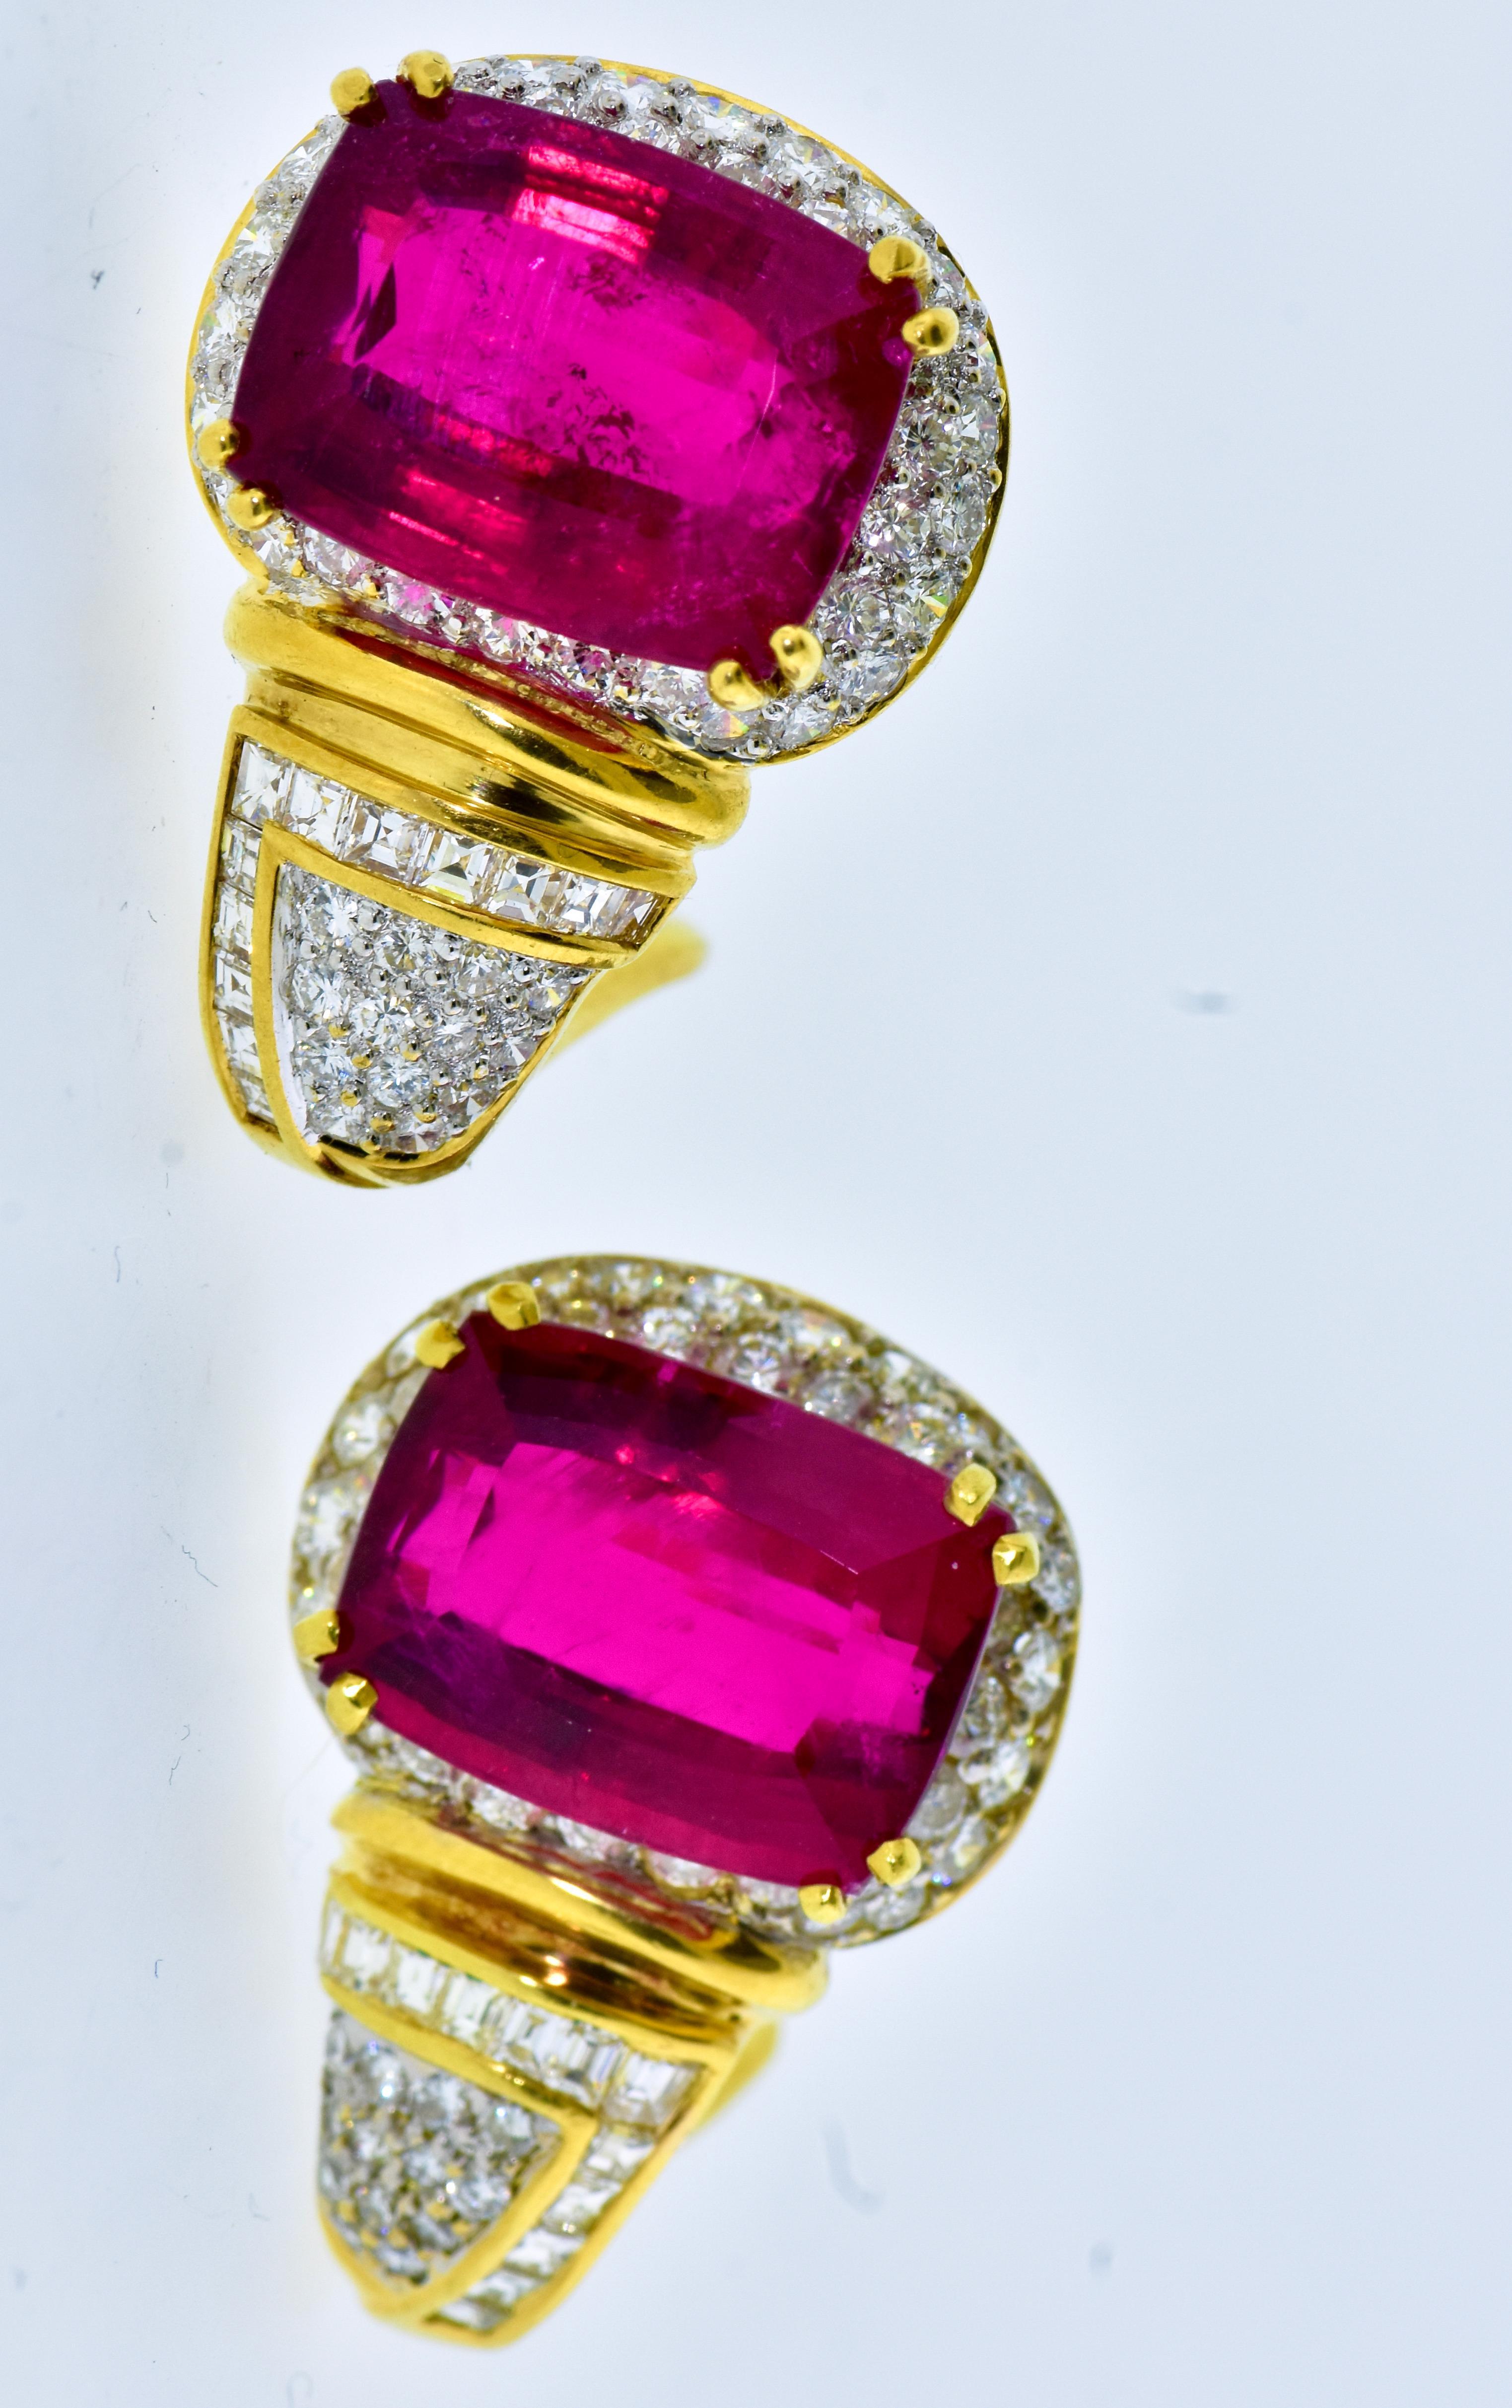 Red Tourmaline weighing 26 Cts. with fine Diamonds, 5 cts., in 18k Fine Earrings In Excellent Condition For Sale In Aspen, CO